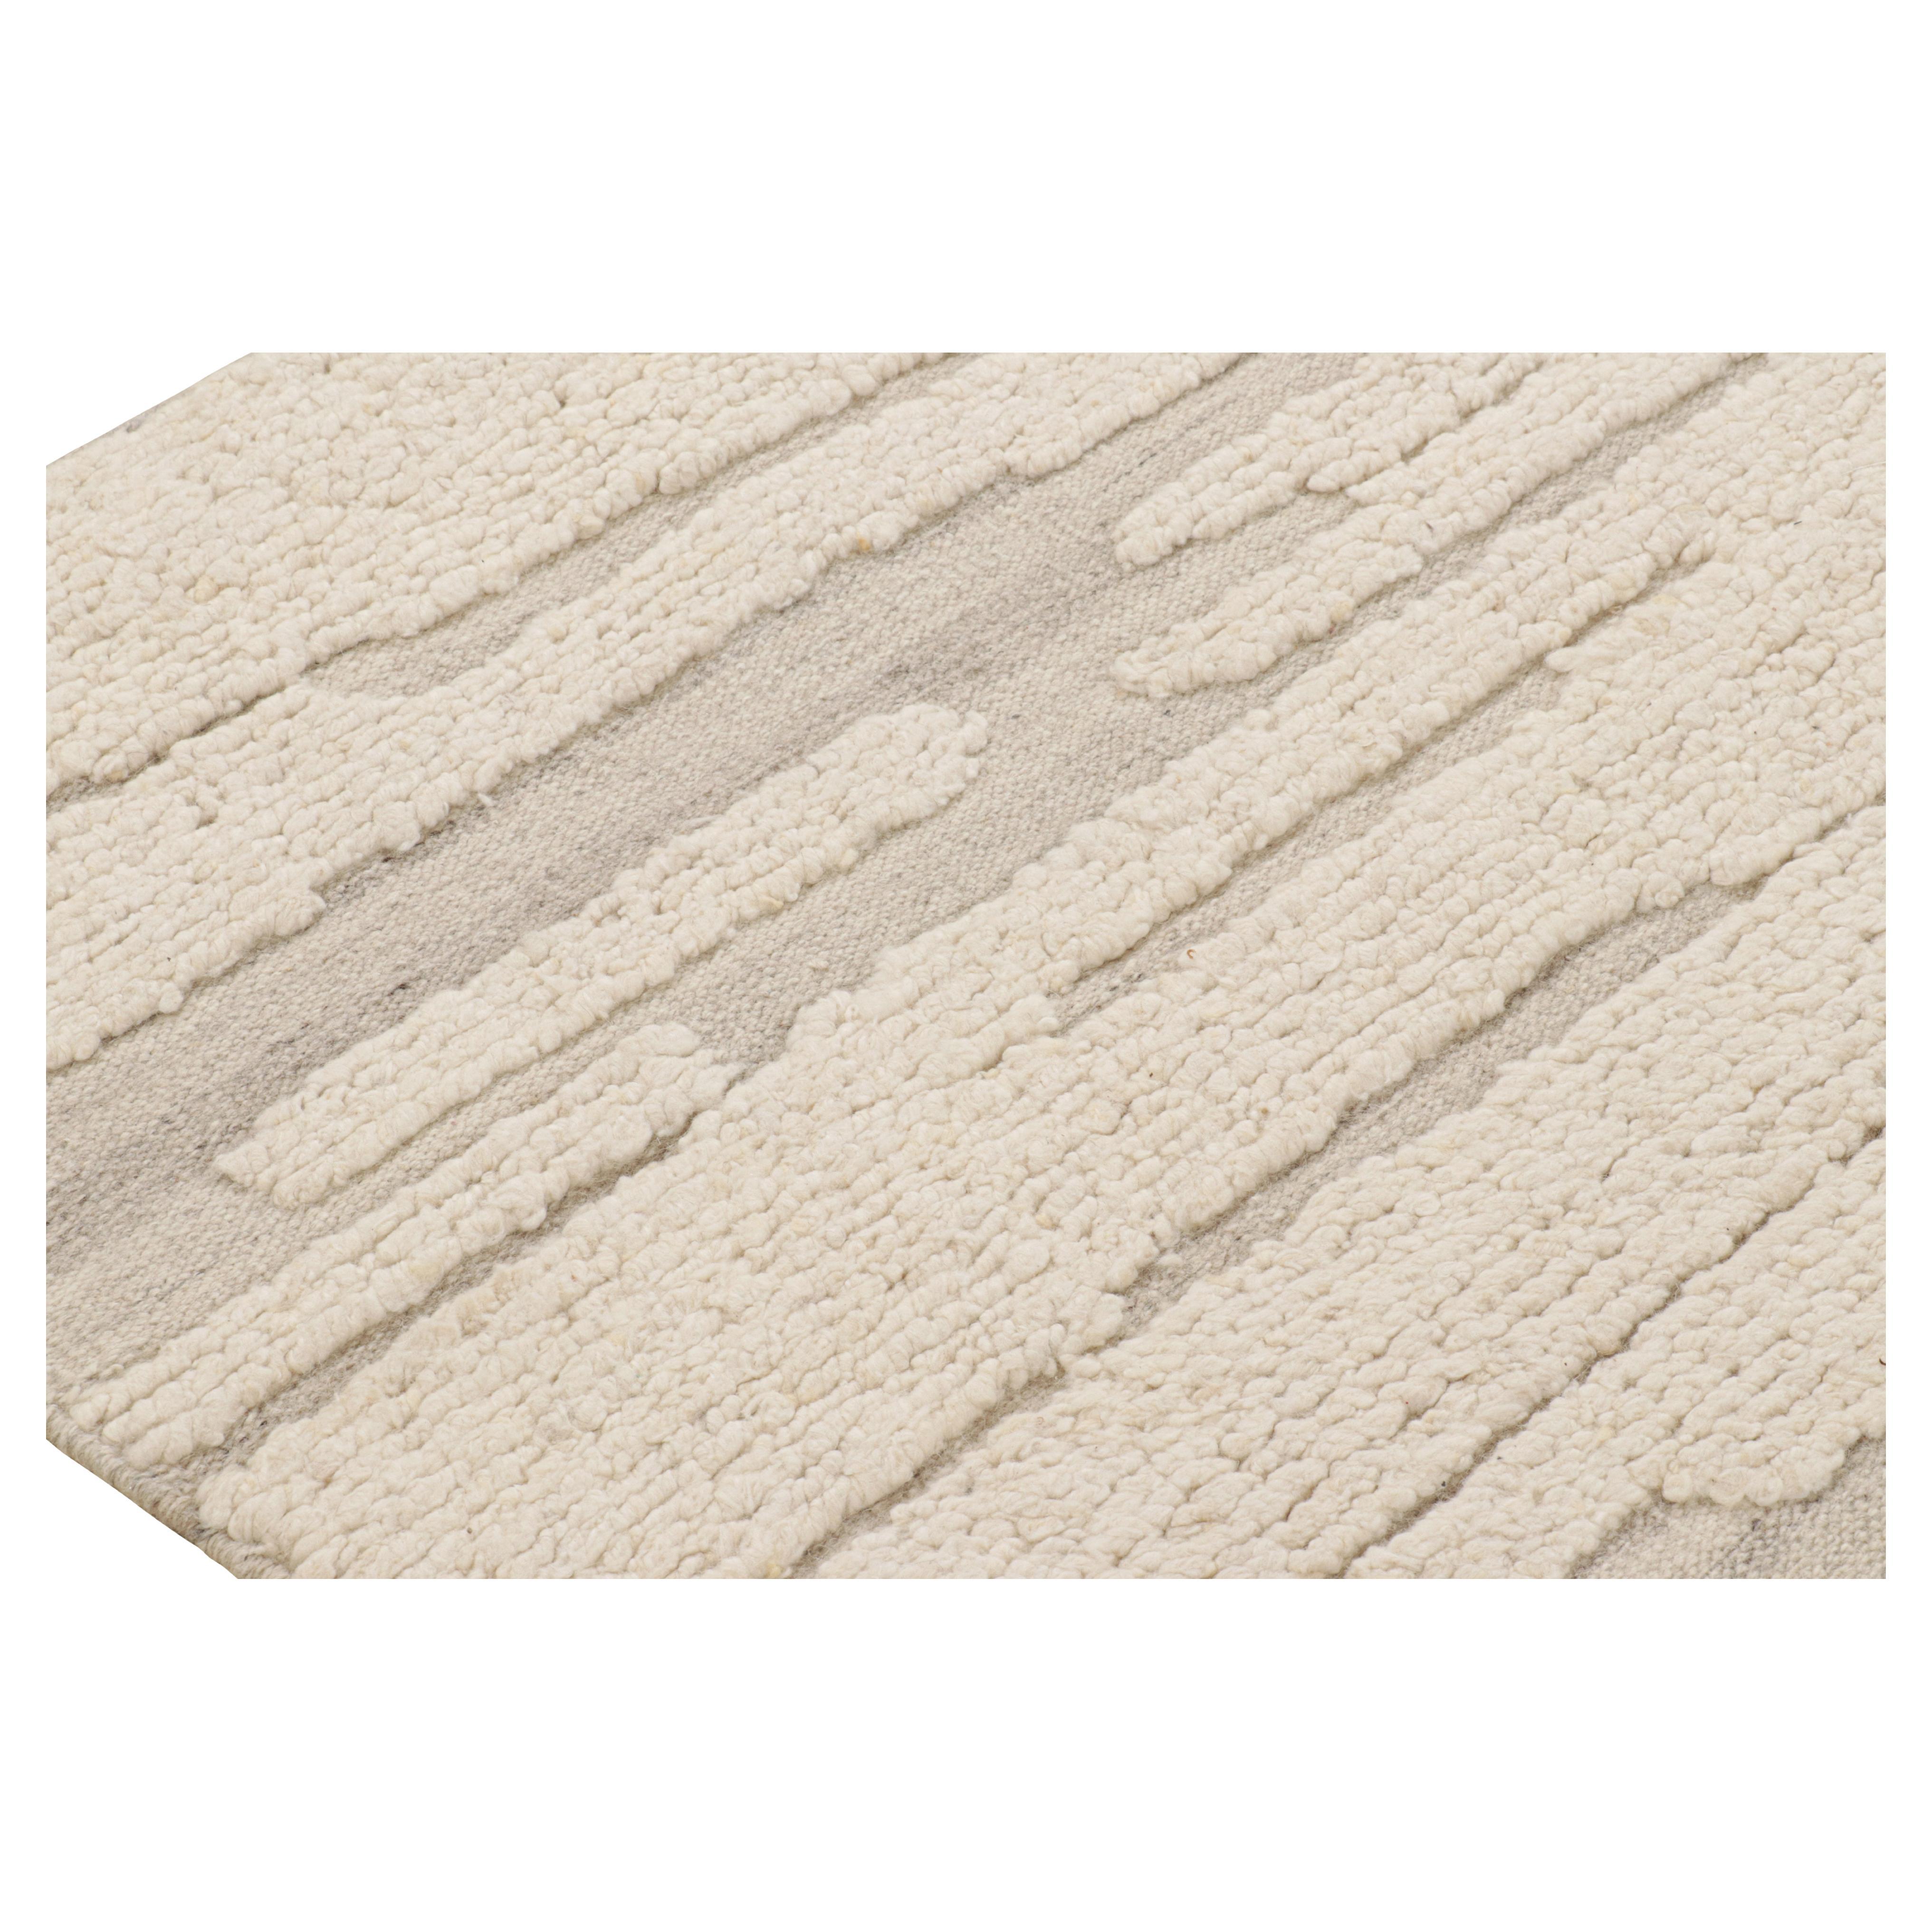 Rug & Kilim’s Textural Kilim in White Abstract High-Low Patterns For Sale